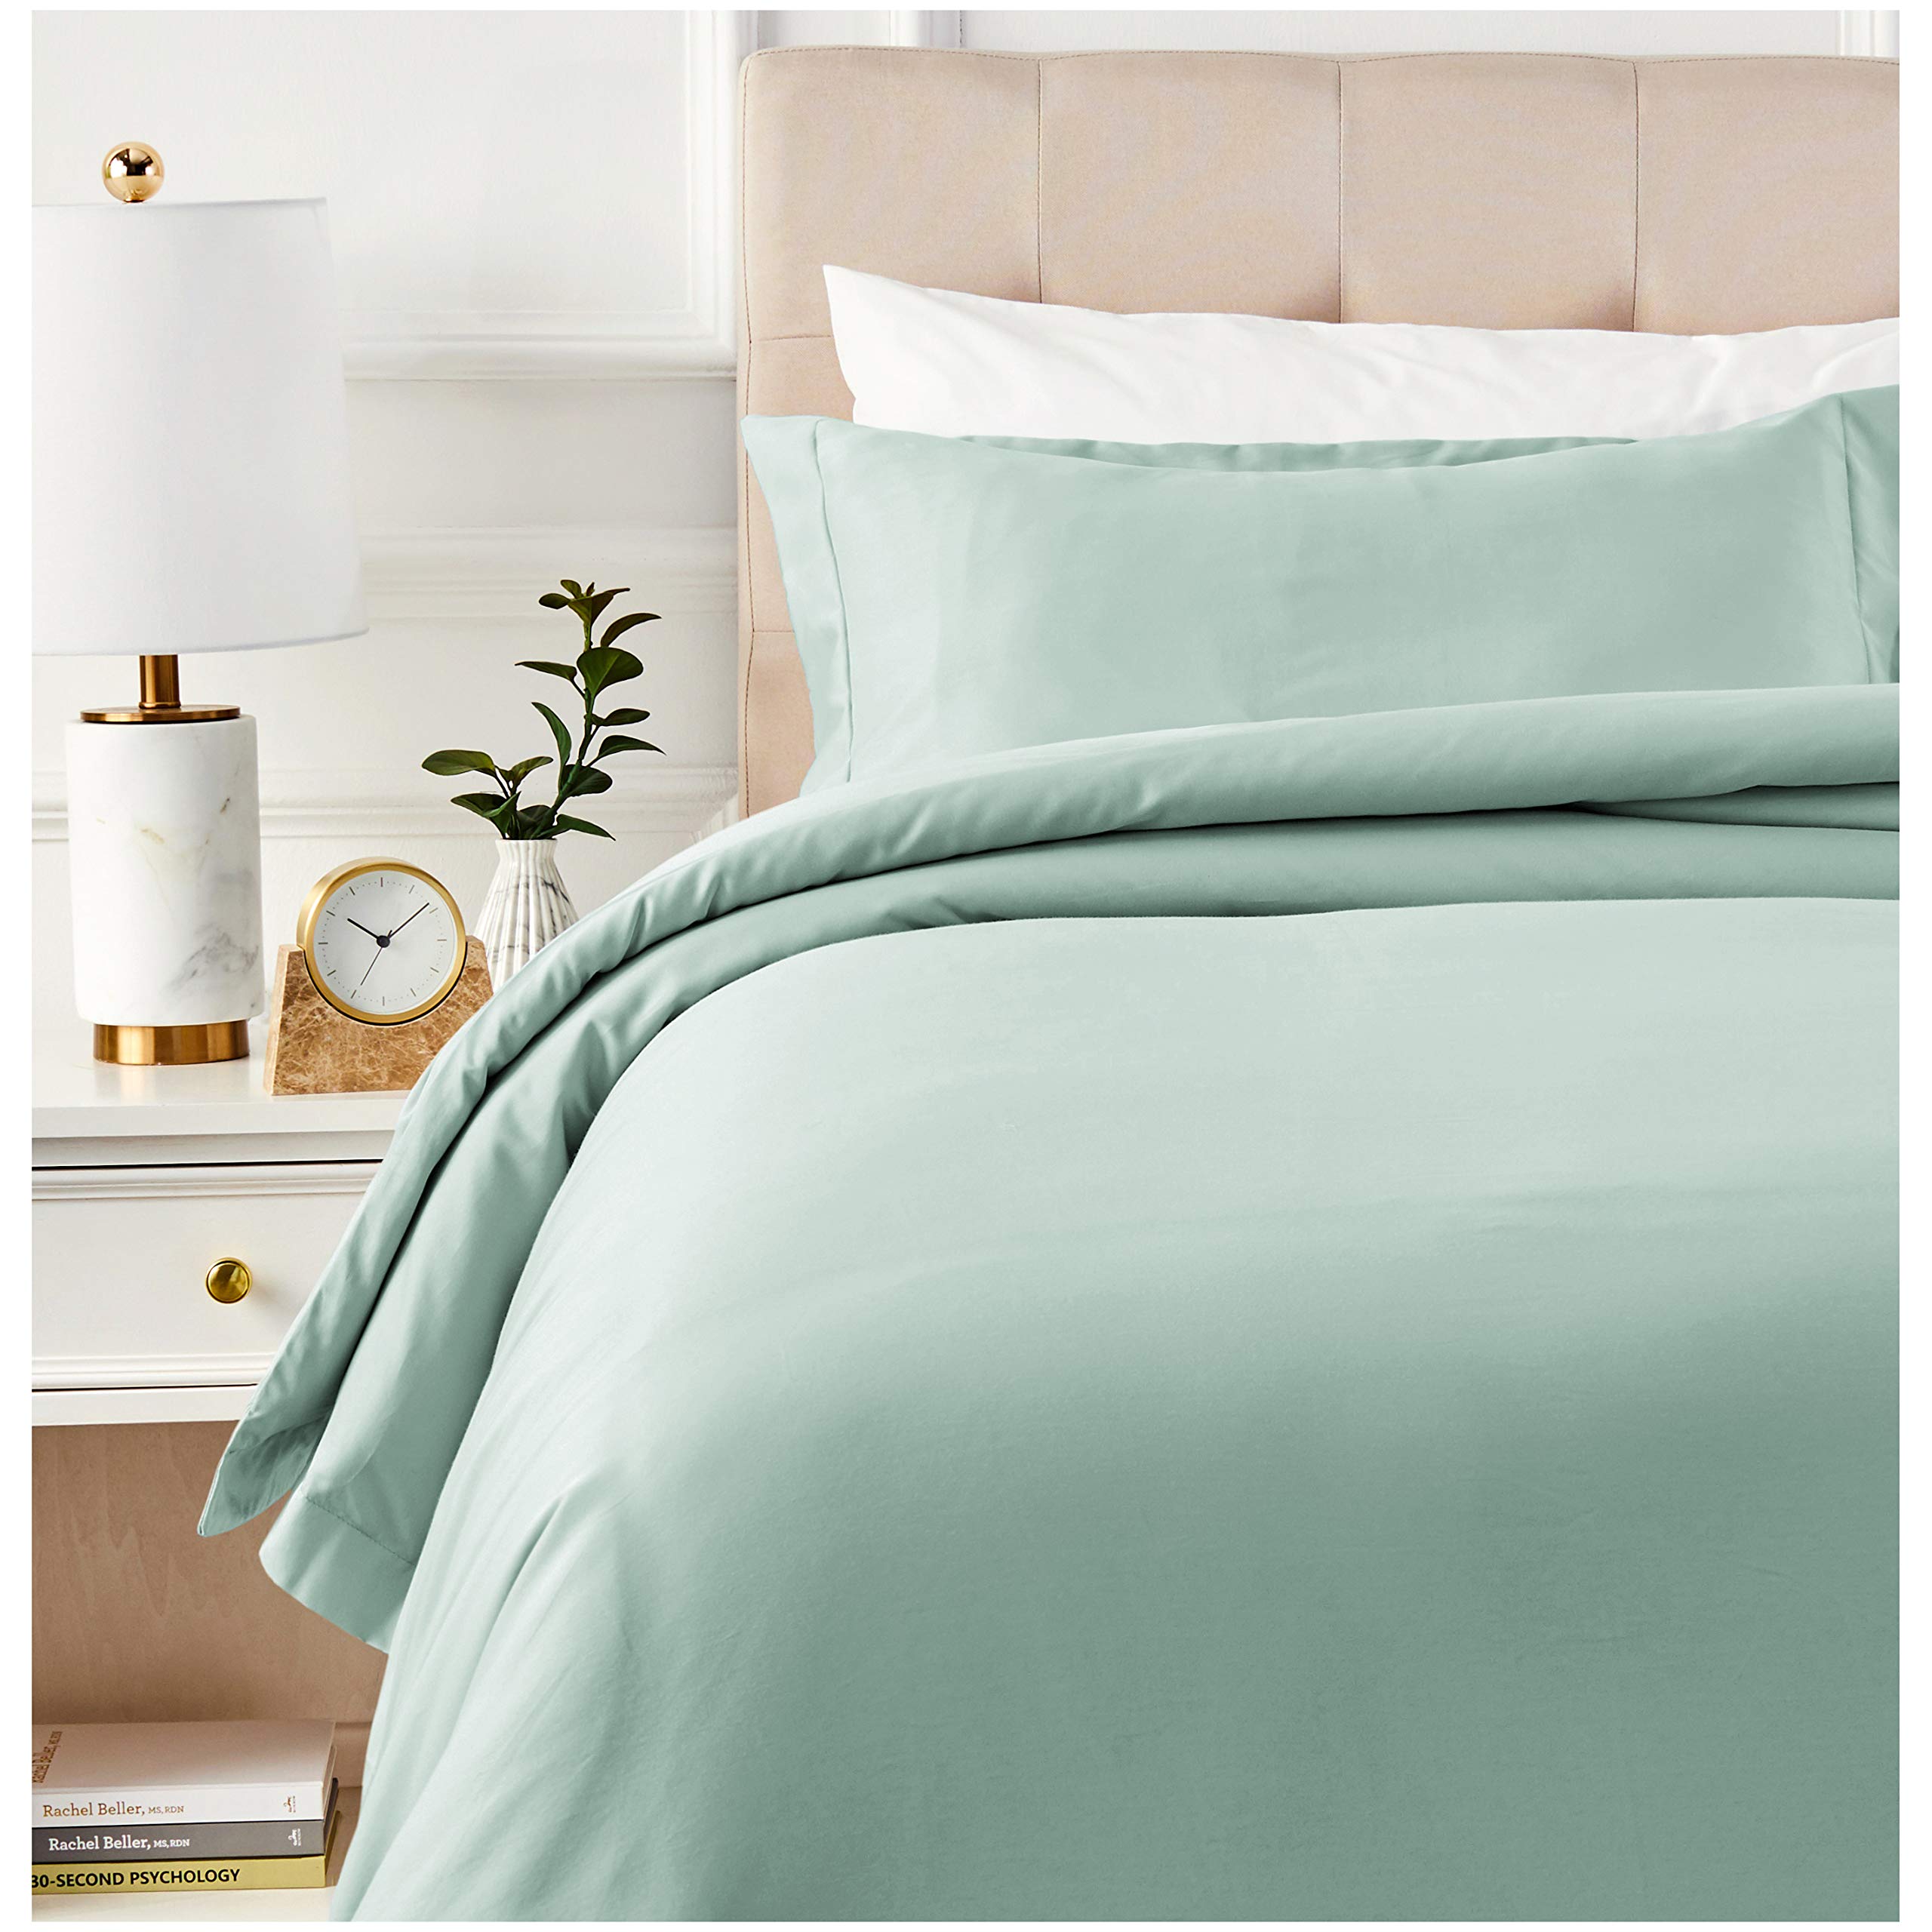 Book Cover Amazon Basics 400 Thread Count Cotton Duvet Cover Set with Sateen Finish - Twin, Seafoam Green